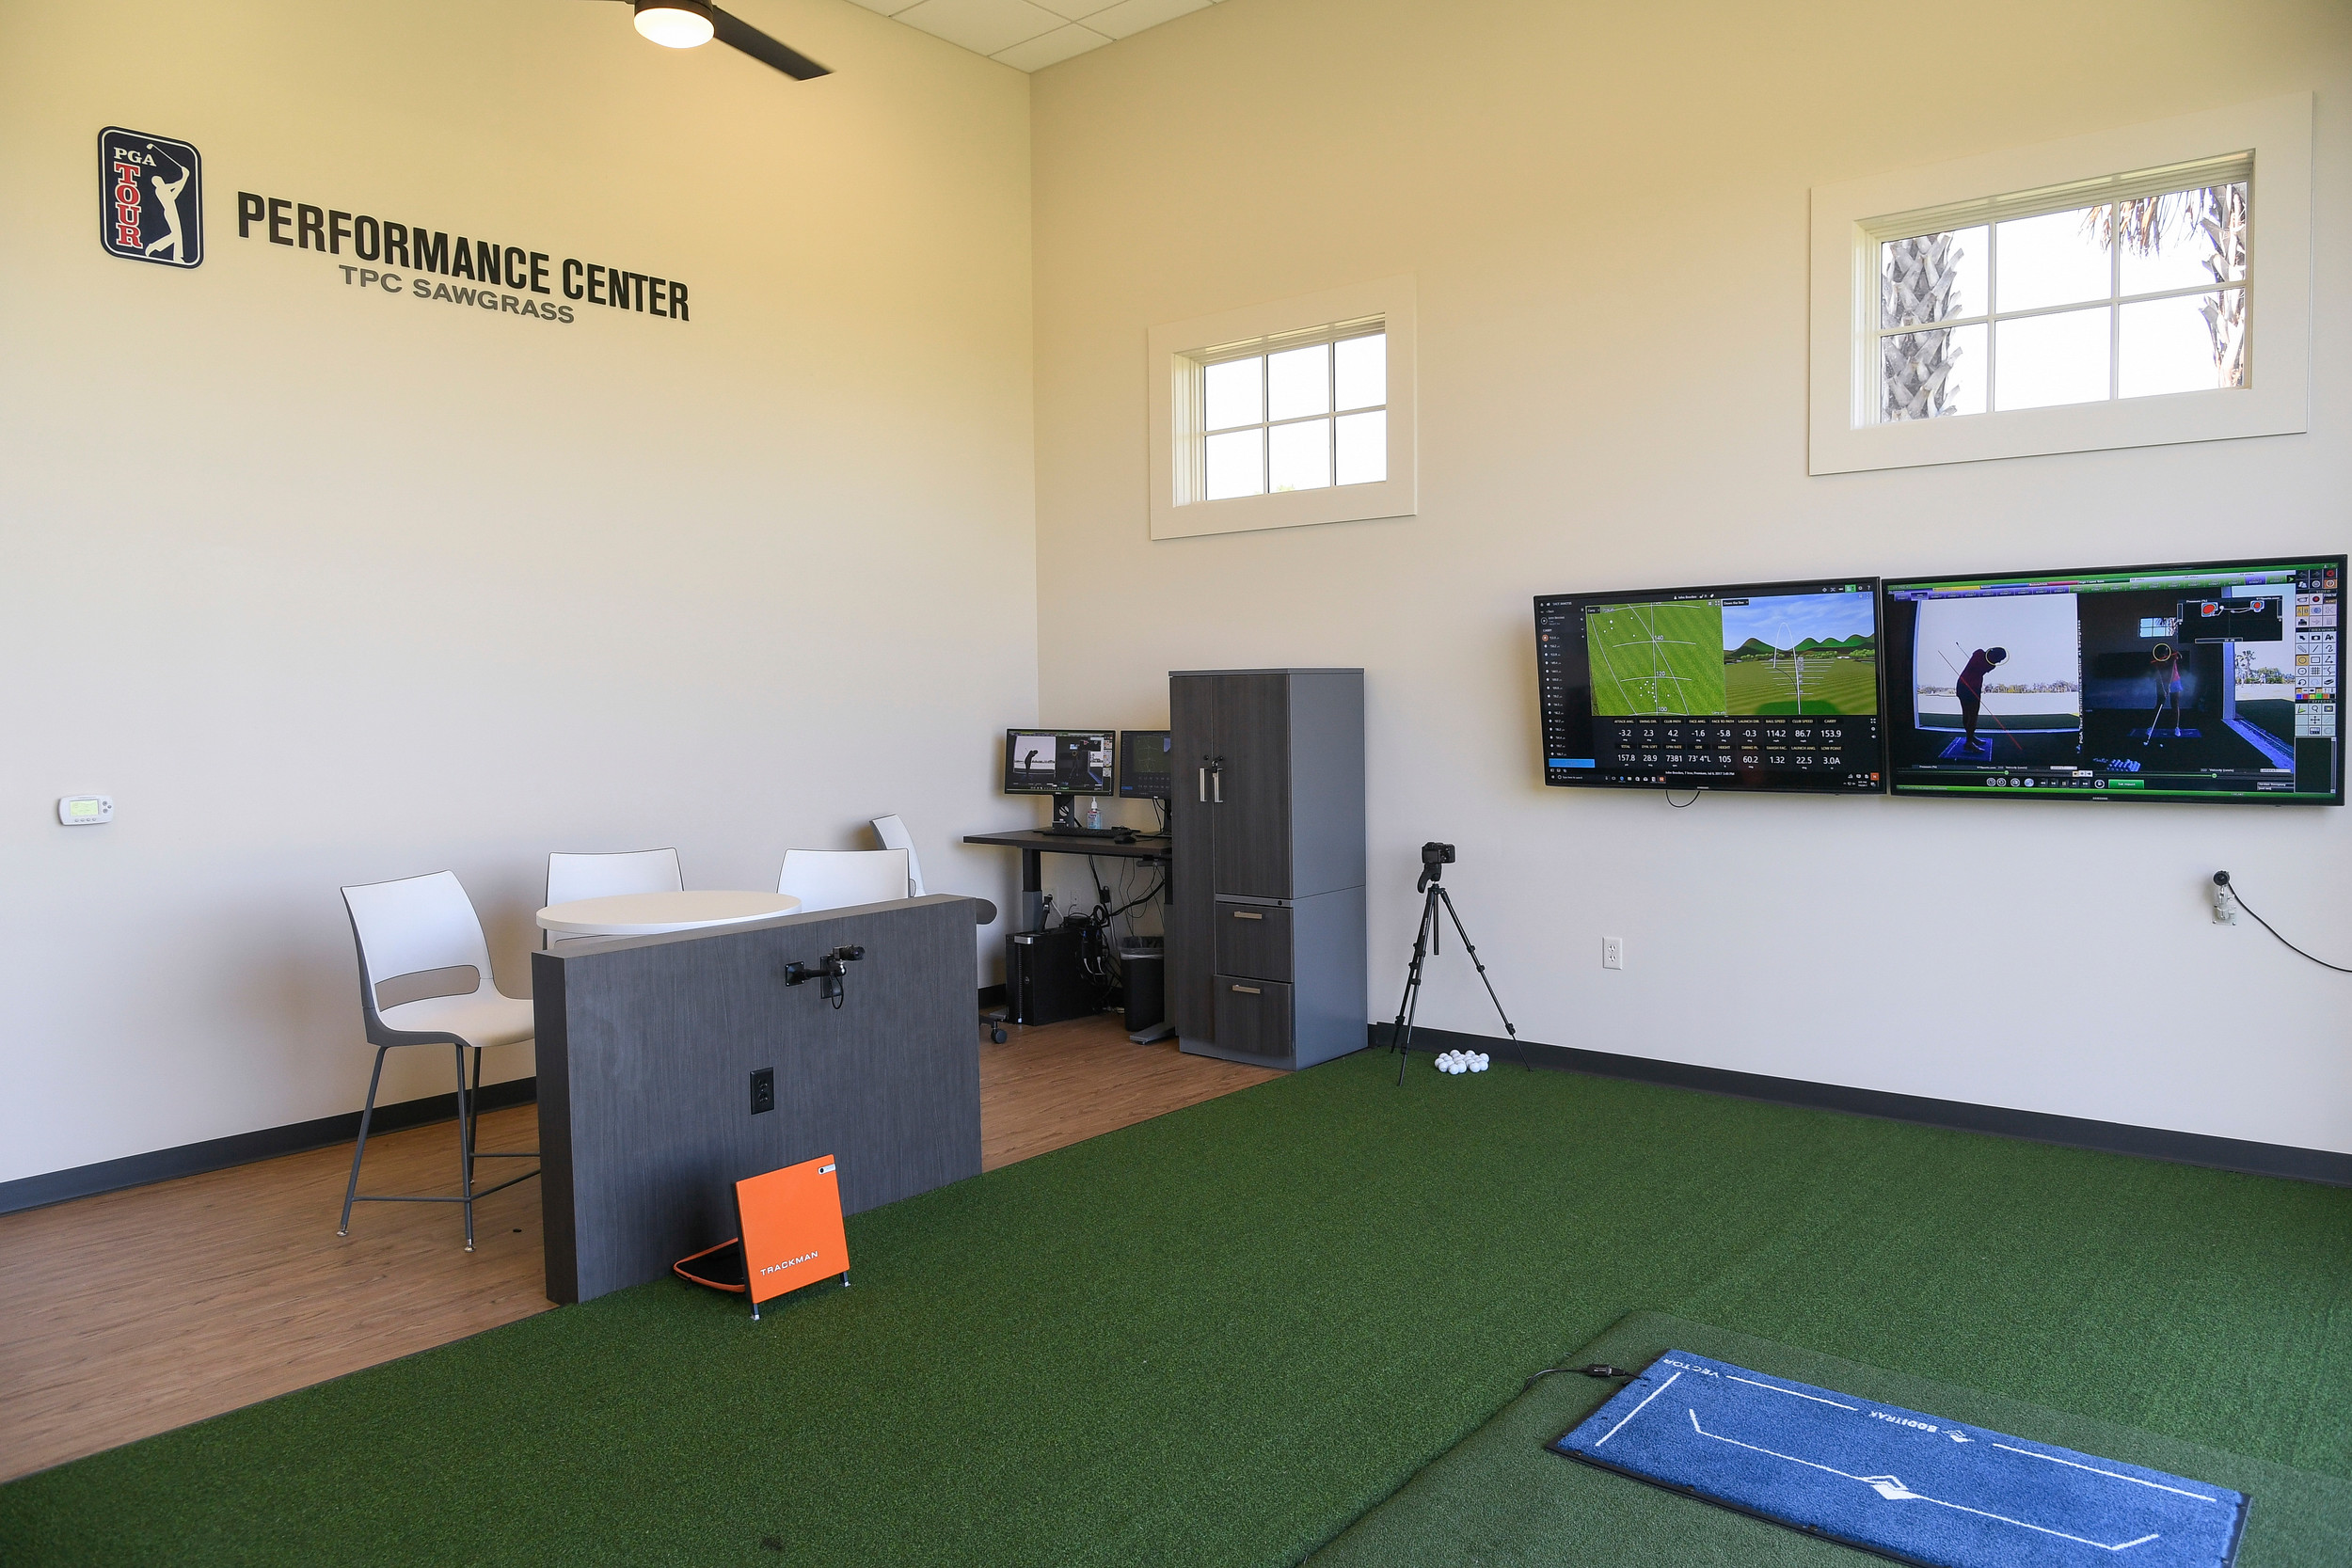 The performance center’s hitting bays feature state of the art technology to help students improve their game.